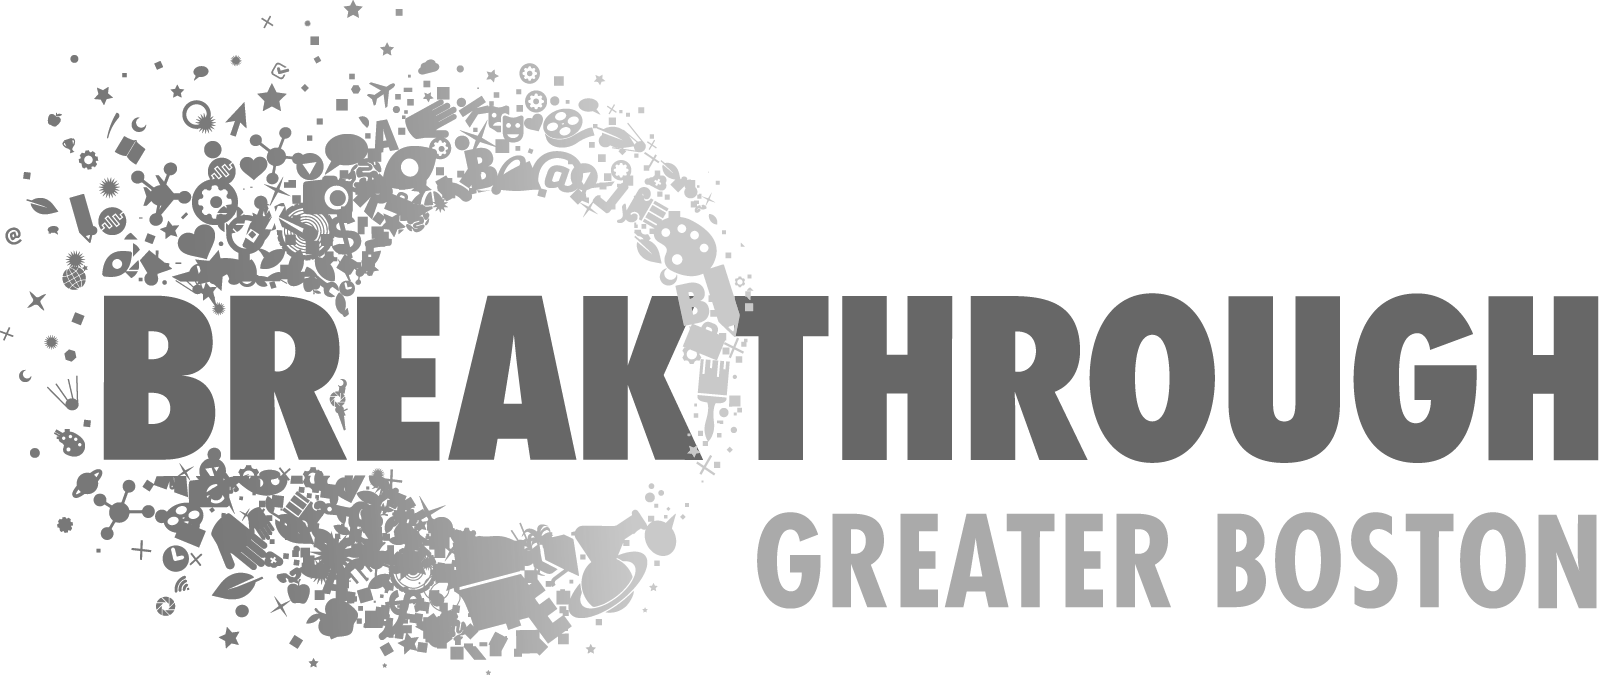 Breakthrough Greater Boston Puts Students on the P